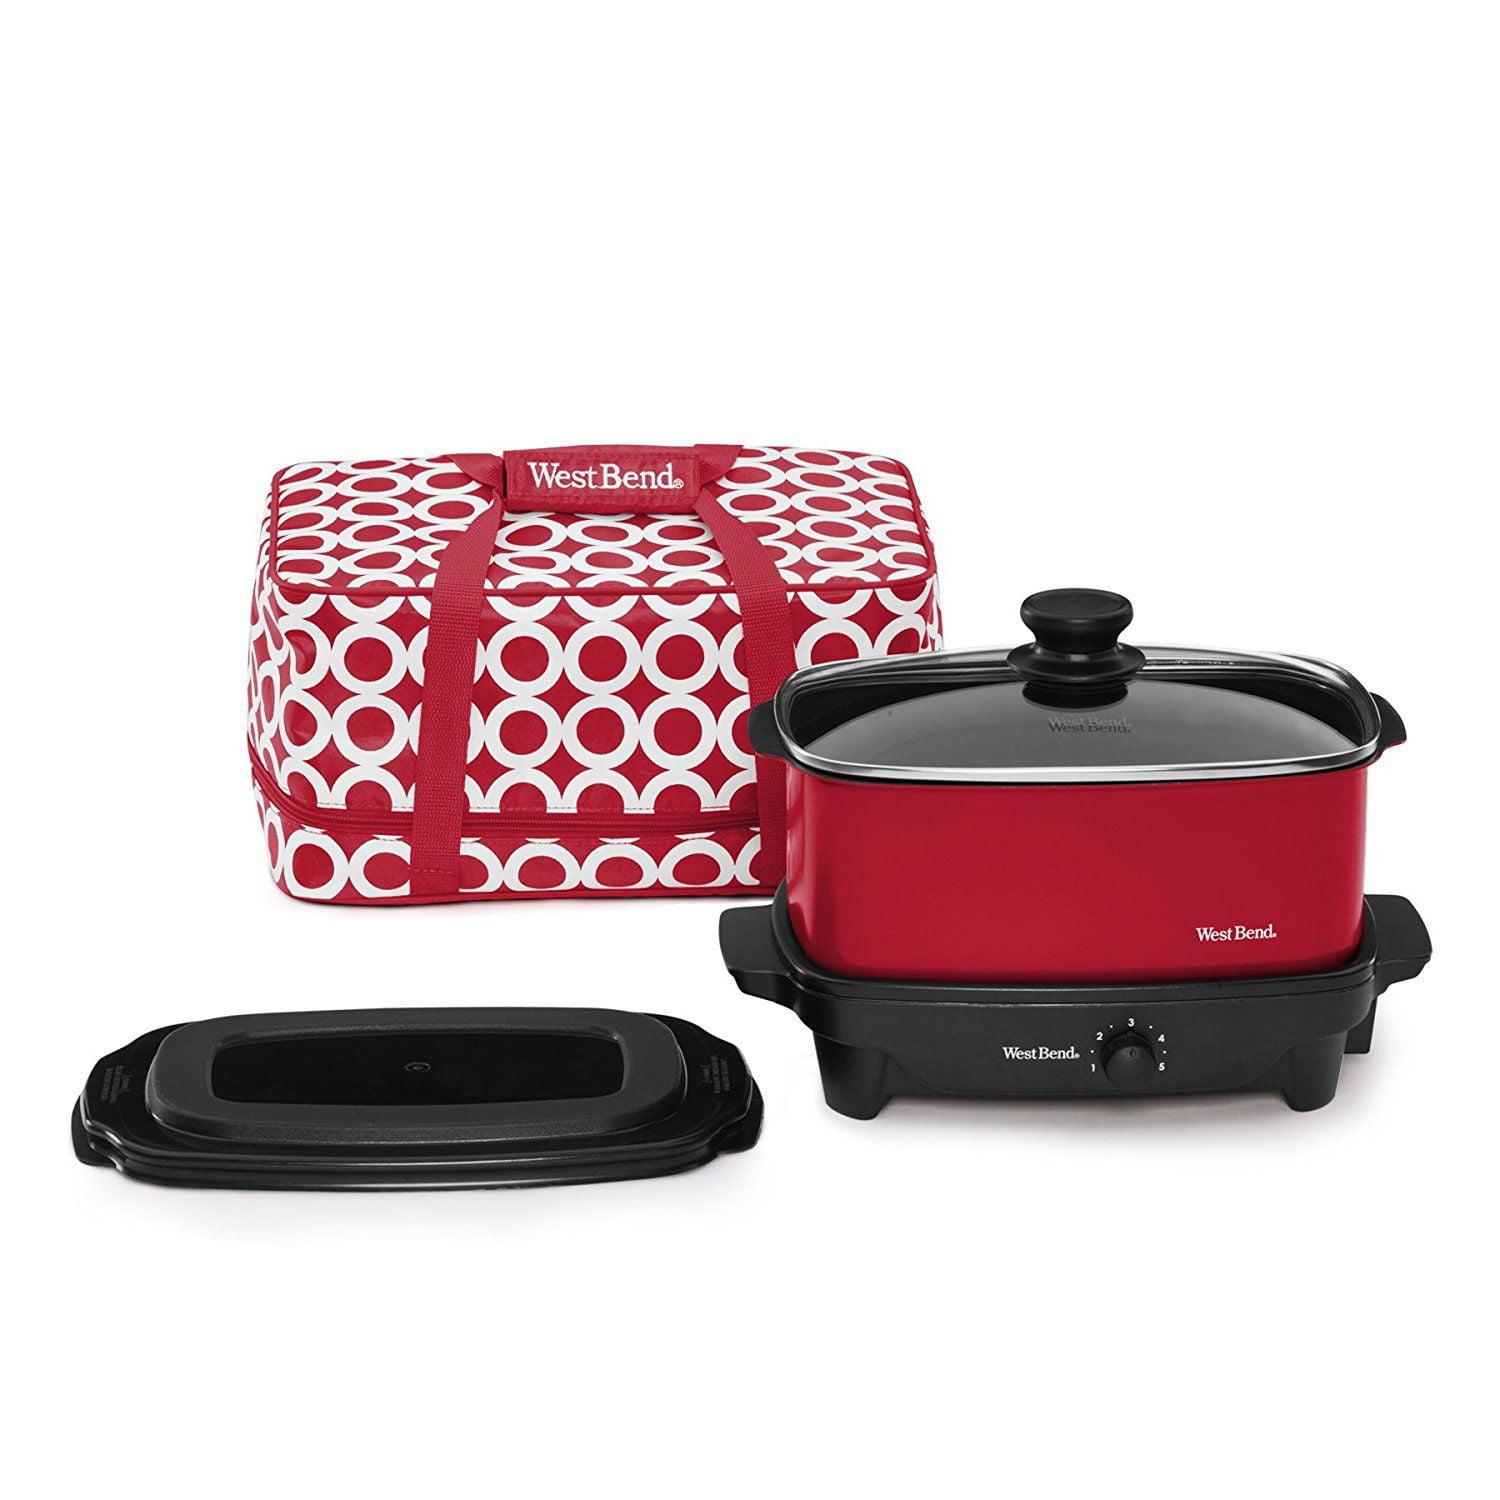 West Bend 84915R 5-Quart Versatility Slow Cooker with Tote, Red 